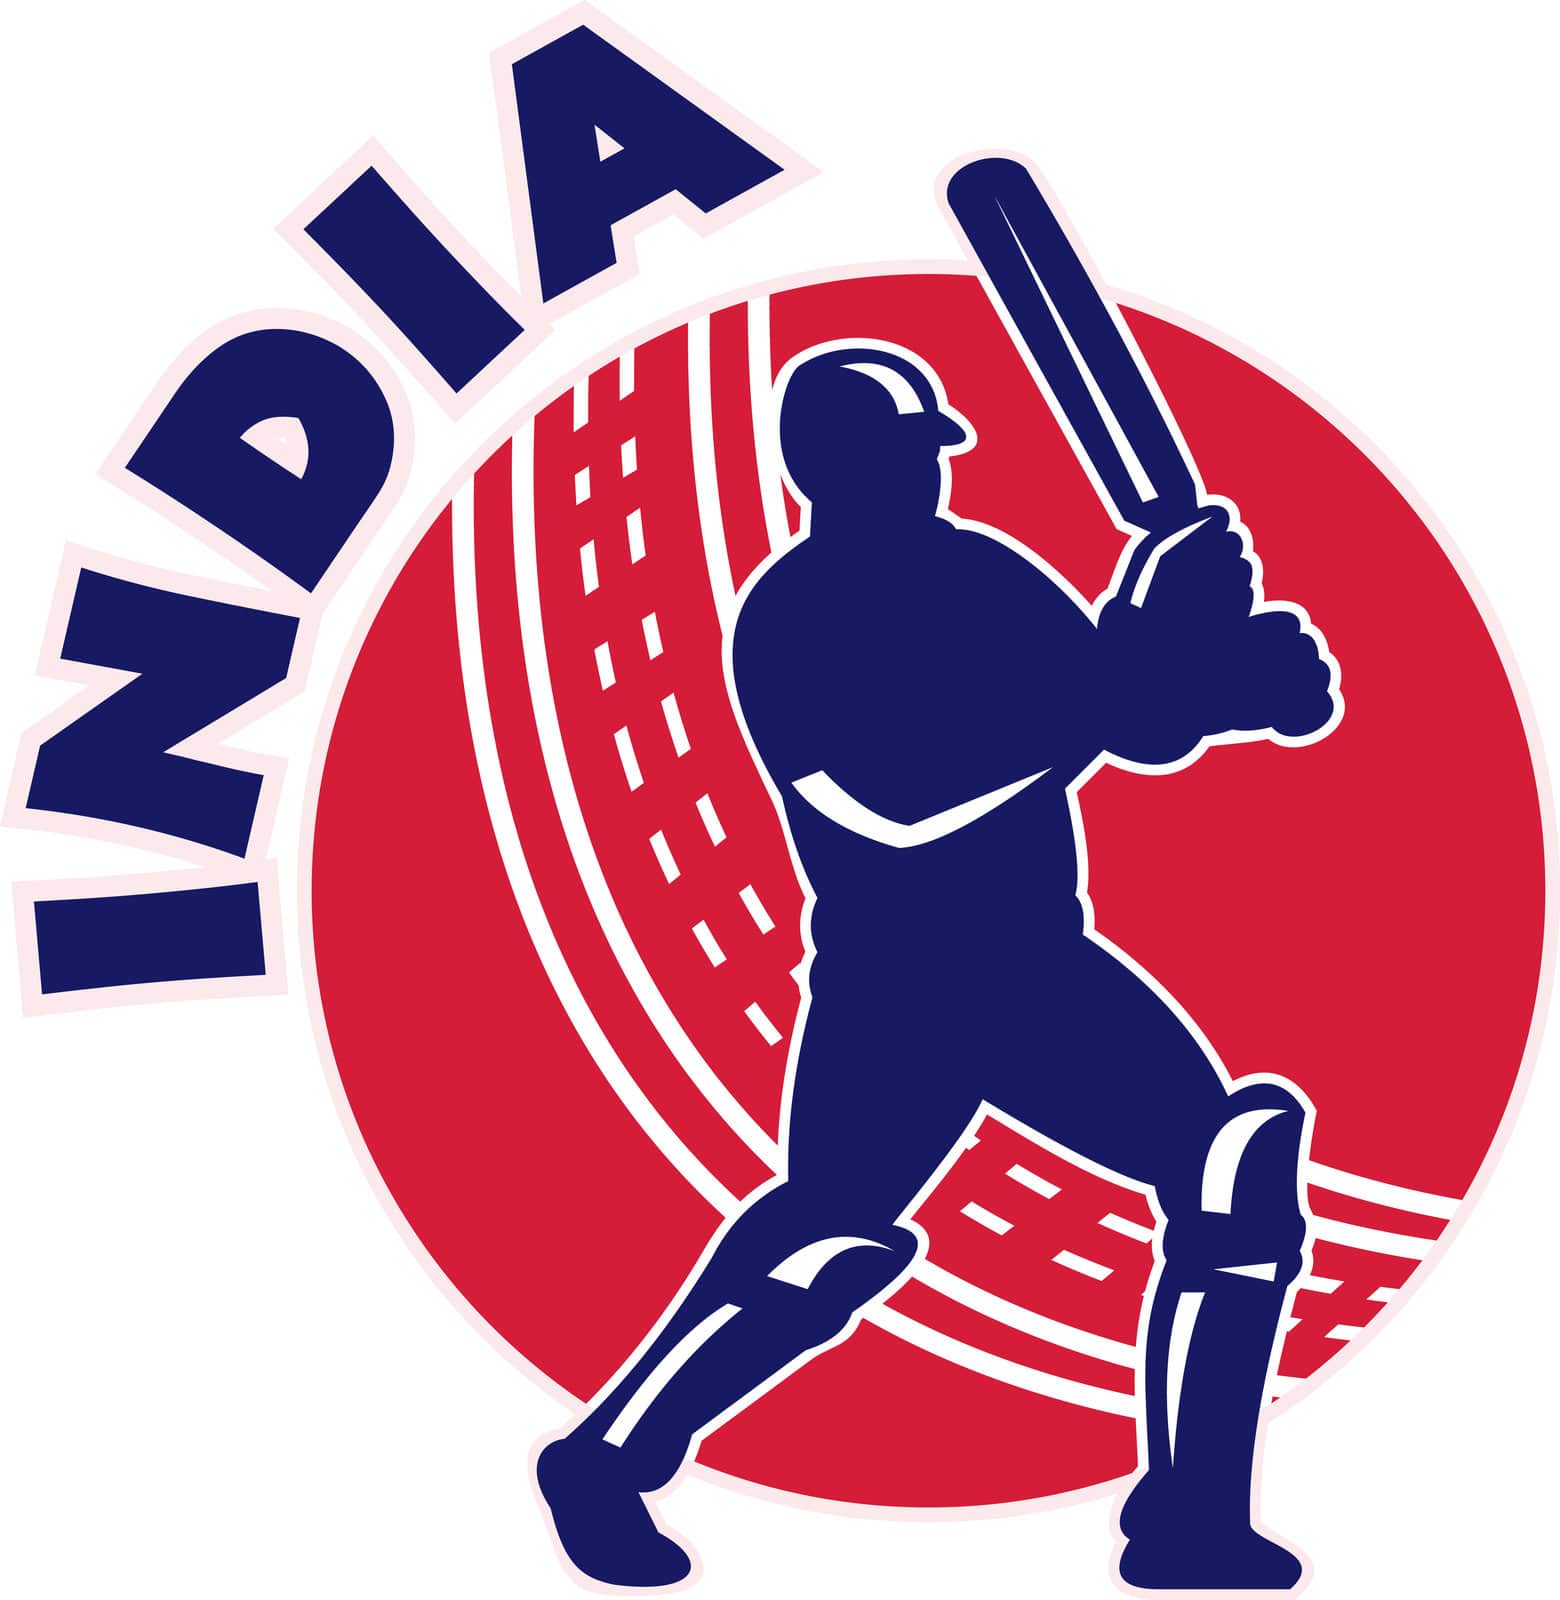 IPL tournament had started in 2008 in India 